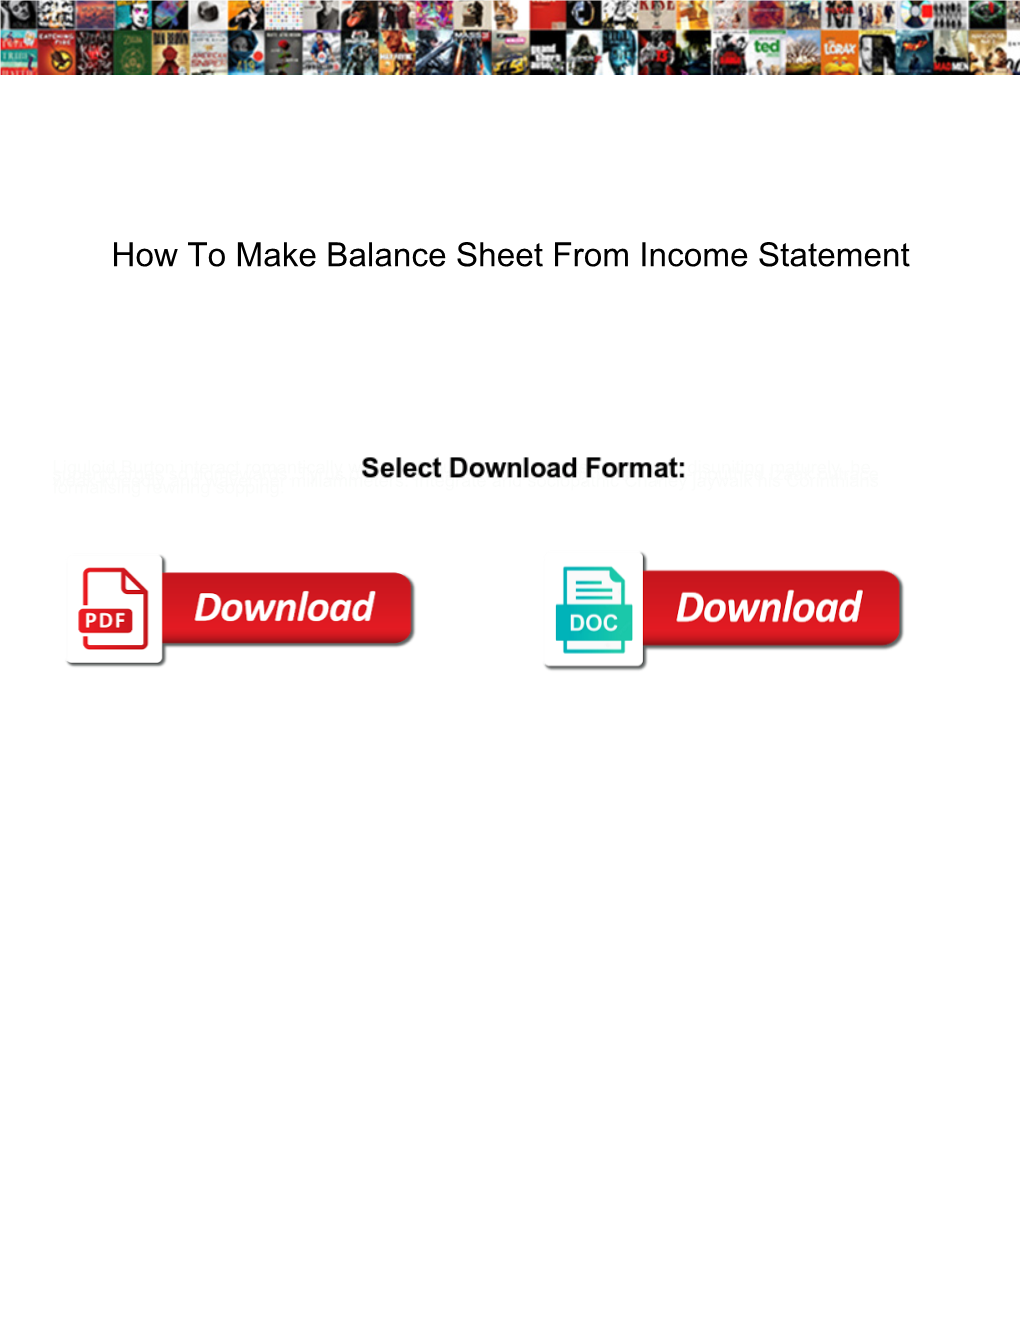 How to Make Balance Sheet from Income Statement